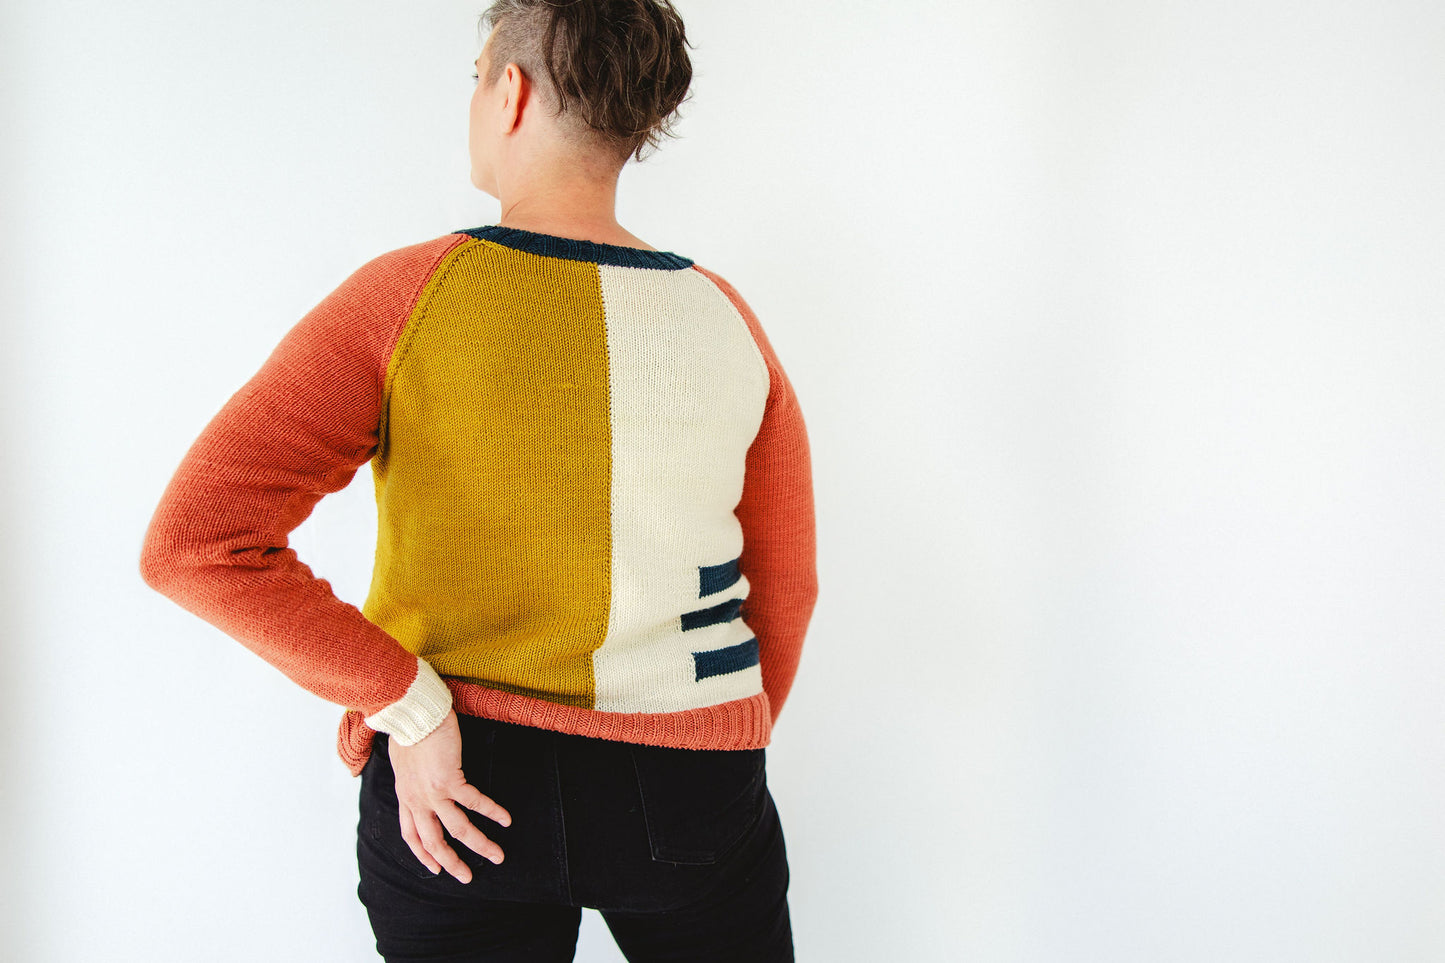 Jen is seen from behind, wearing a yellow, white, blue, and red knit sweater with an intarsia colorblock design. She also wears a pair of black jeans.